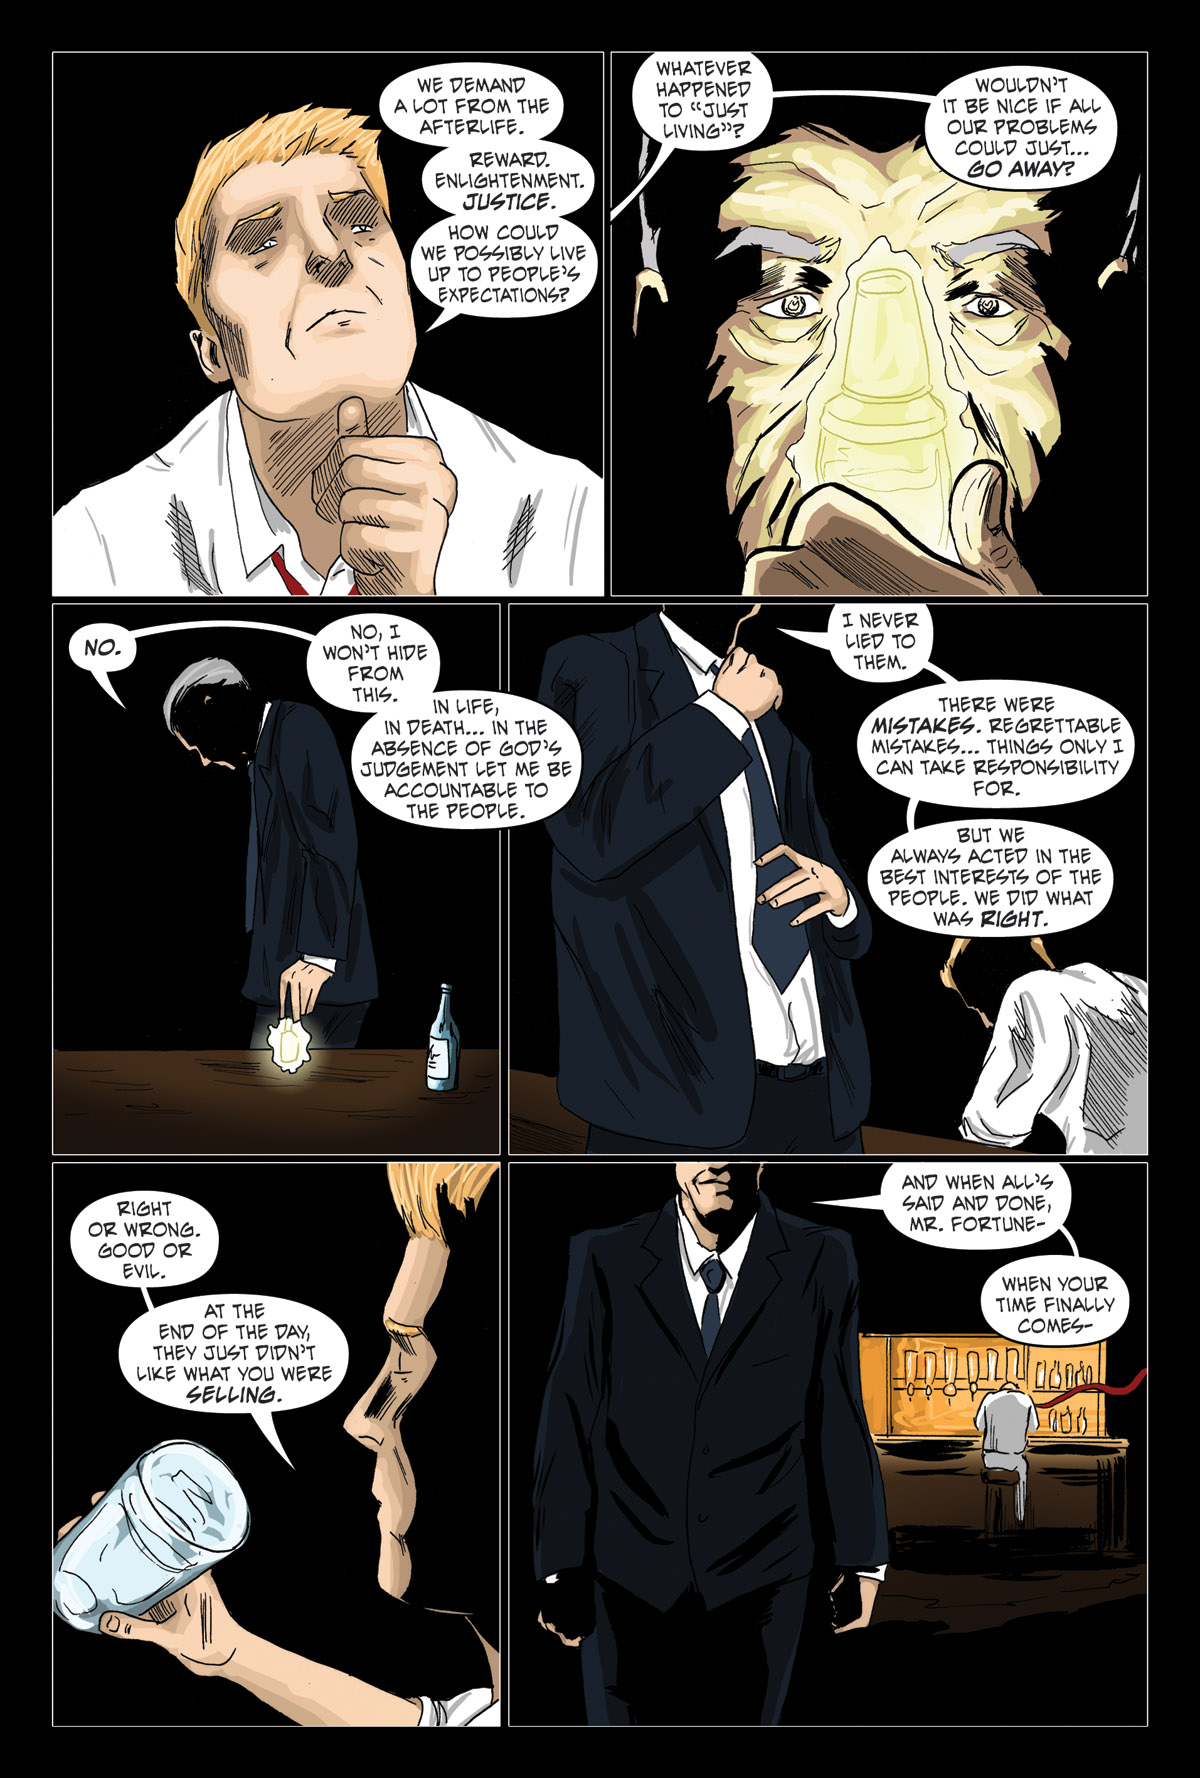 Afterlife Inc. | Silver Screen | Page 6